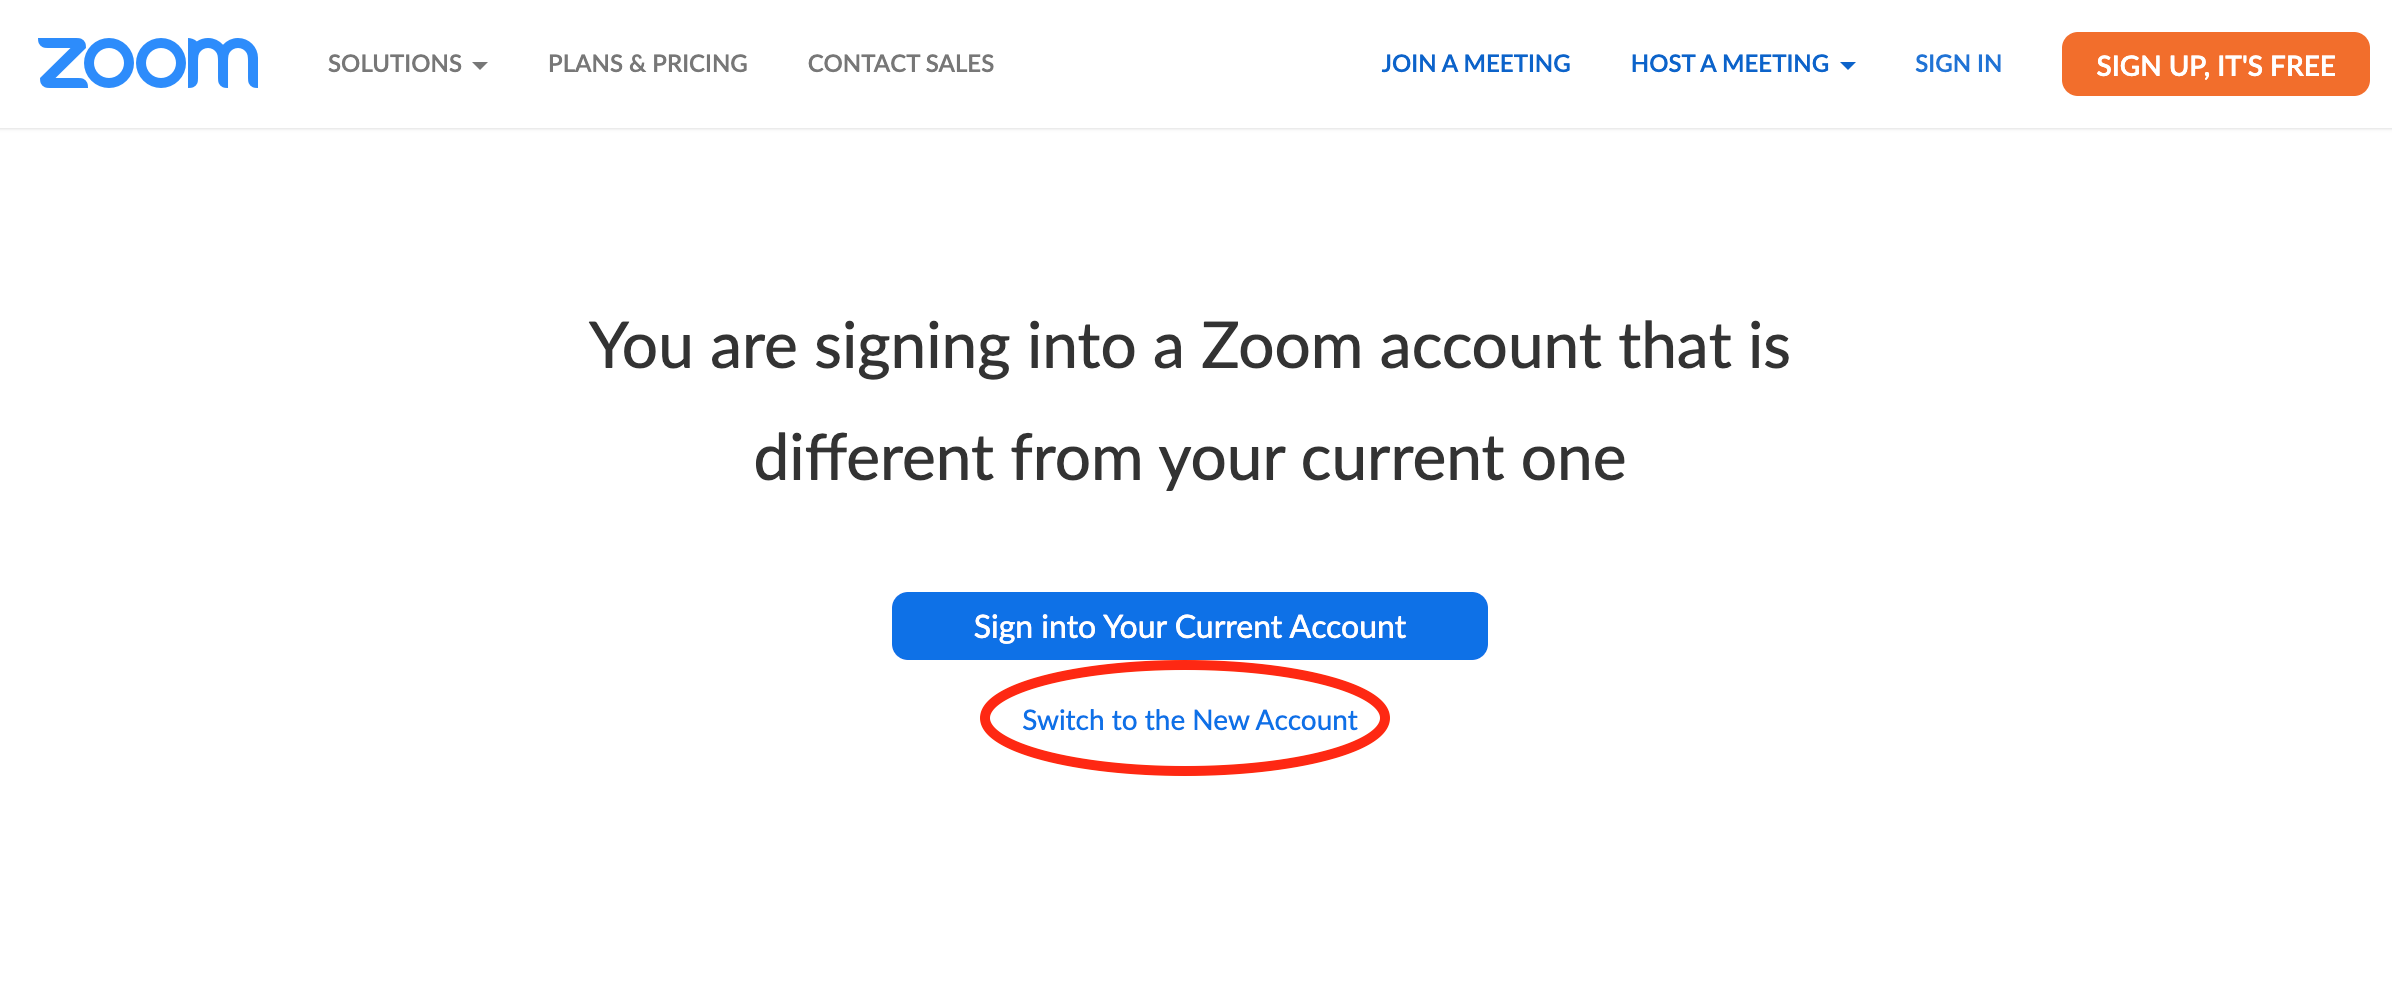 Zoom signin screen with 